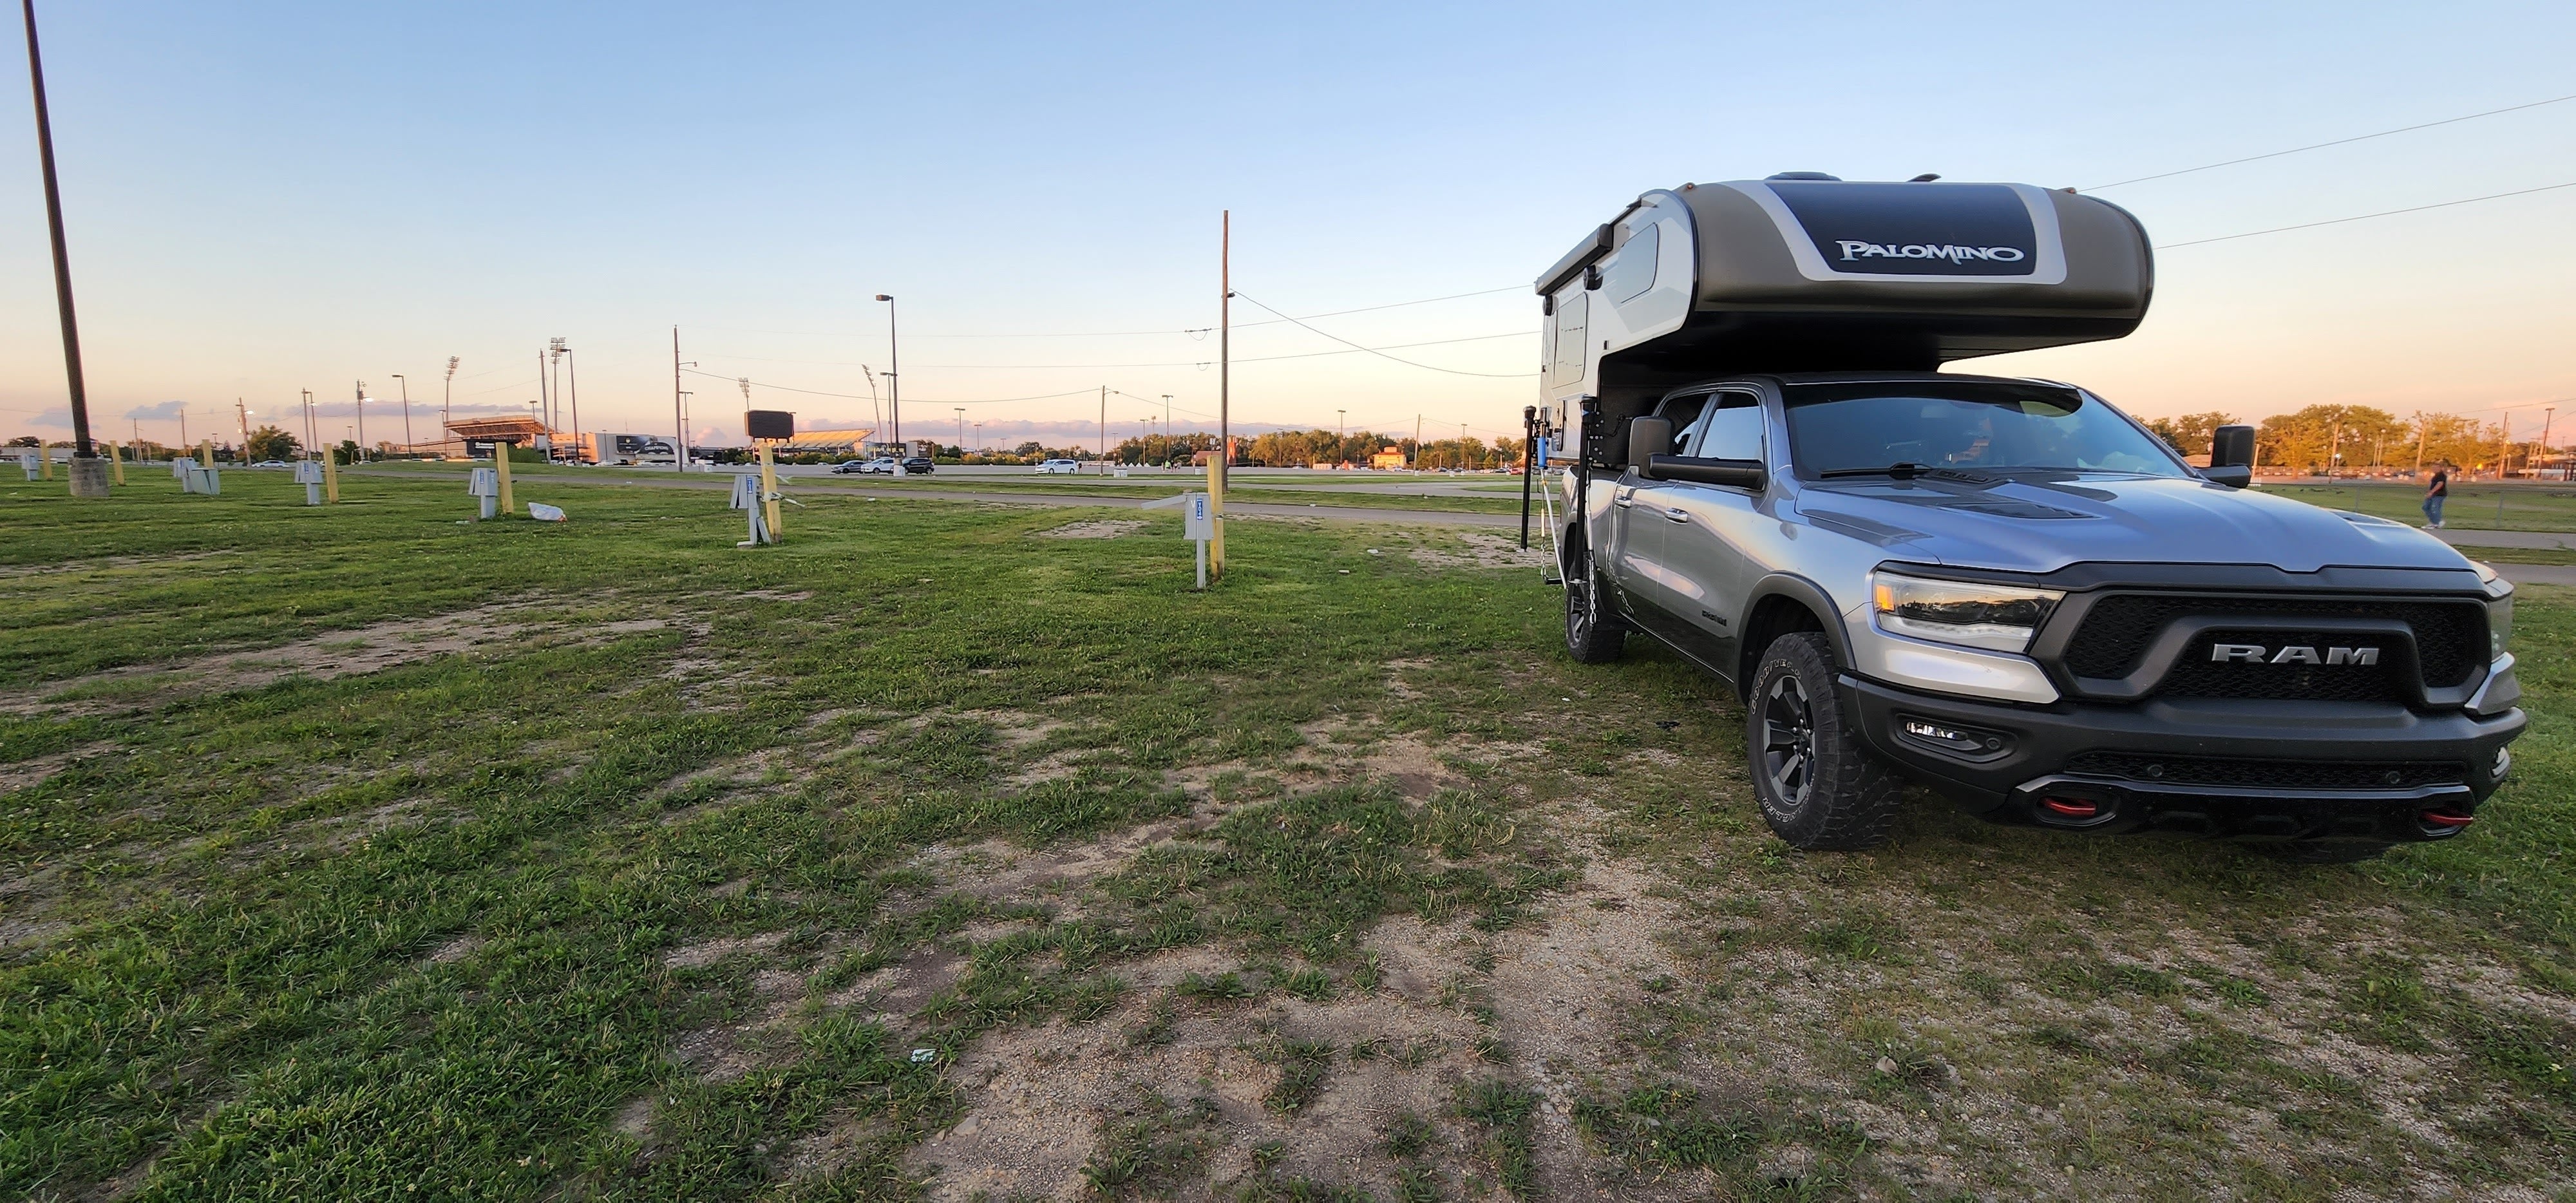 Camper submitted image from Korbel Campgrounds at Ohio Expo Center - 1